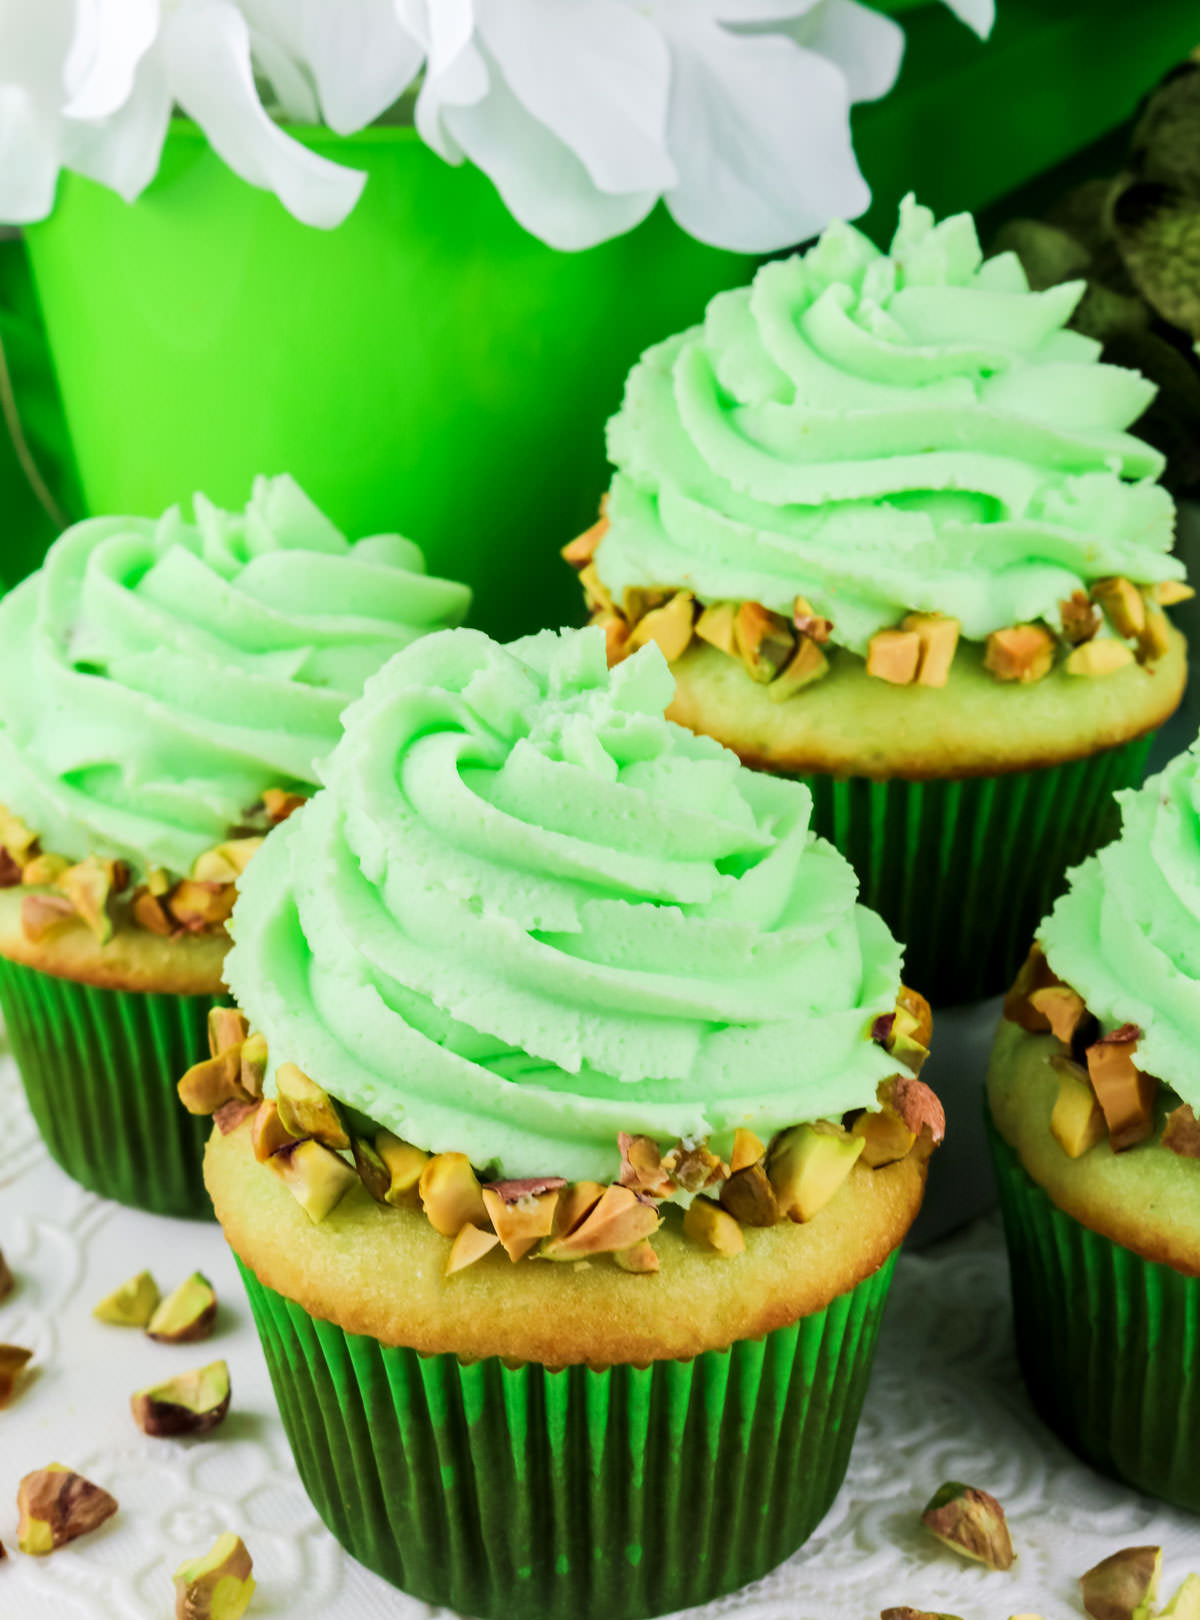 Four Pistachio Cupcakes with Pistachio Whipped Cream Frosting sitting on a white table surrounded by chopped Pistachio nuts.